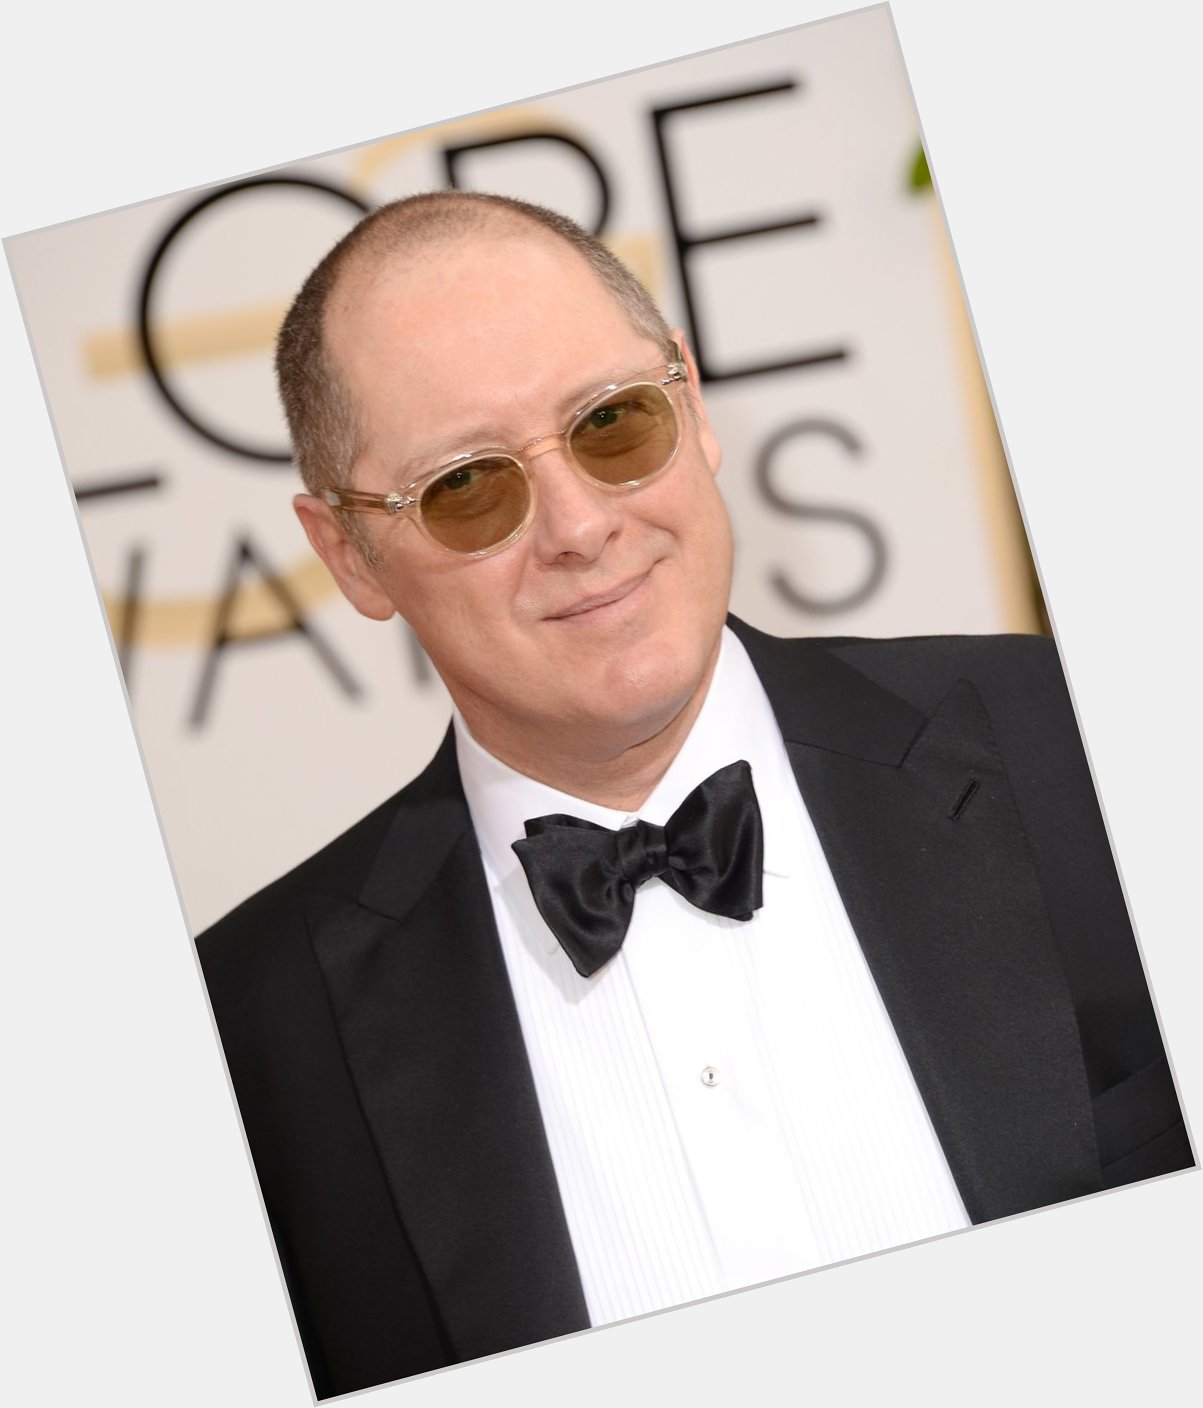 Happy Birthday, James Spader
For Disney, he voiced Ultron in the 2015 Marvel action film, 